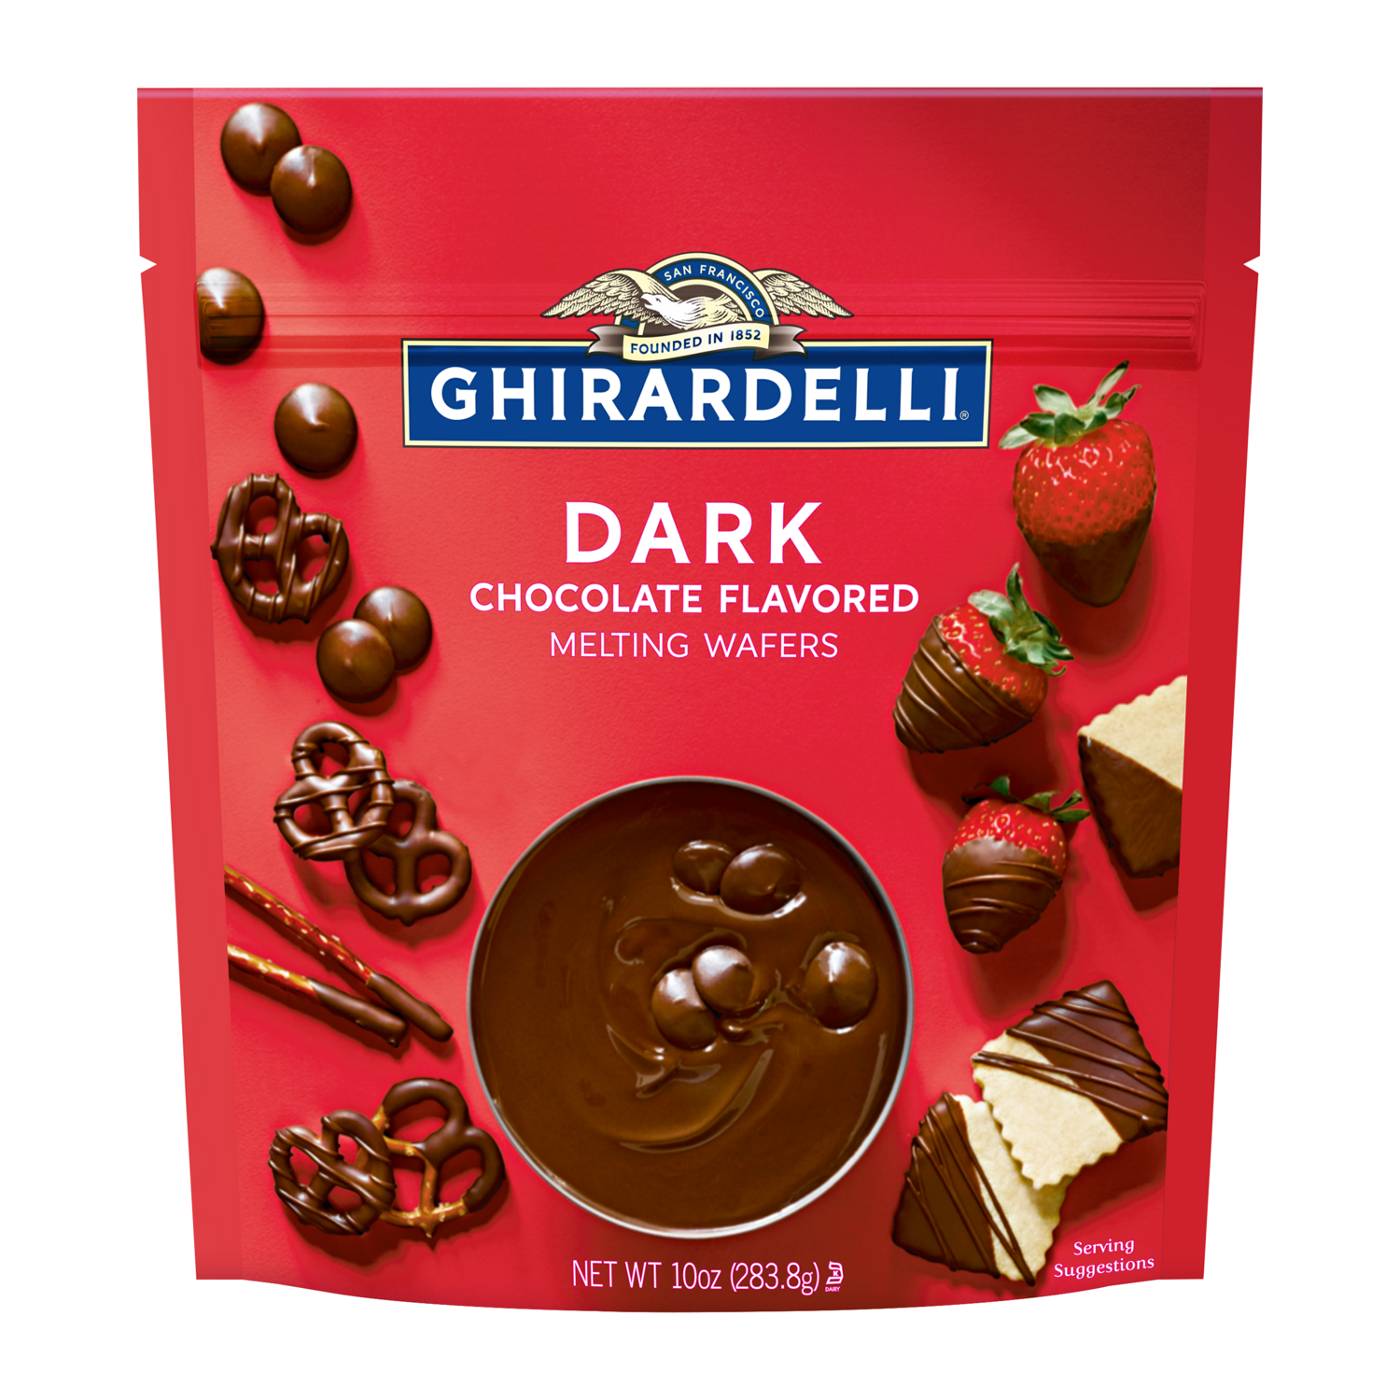 Ghirardelli Dark Chocolate Flavored Melting Wafers; image 1 of 7